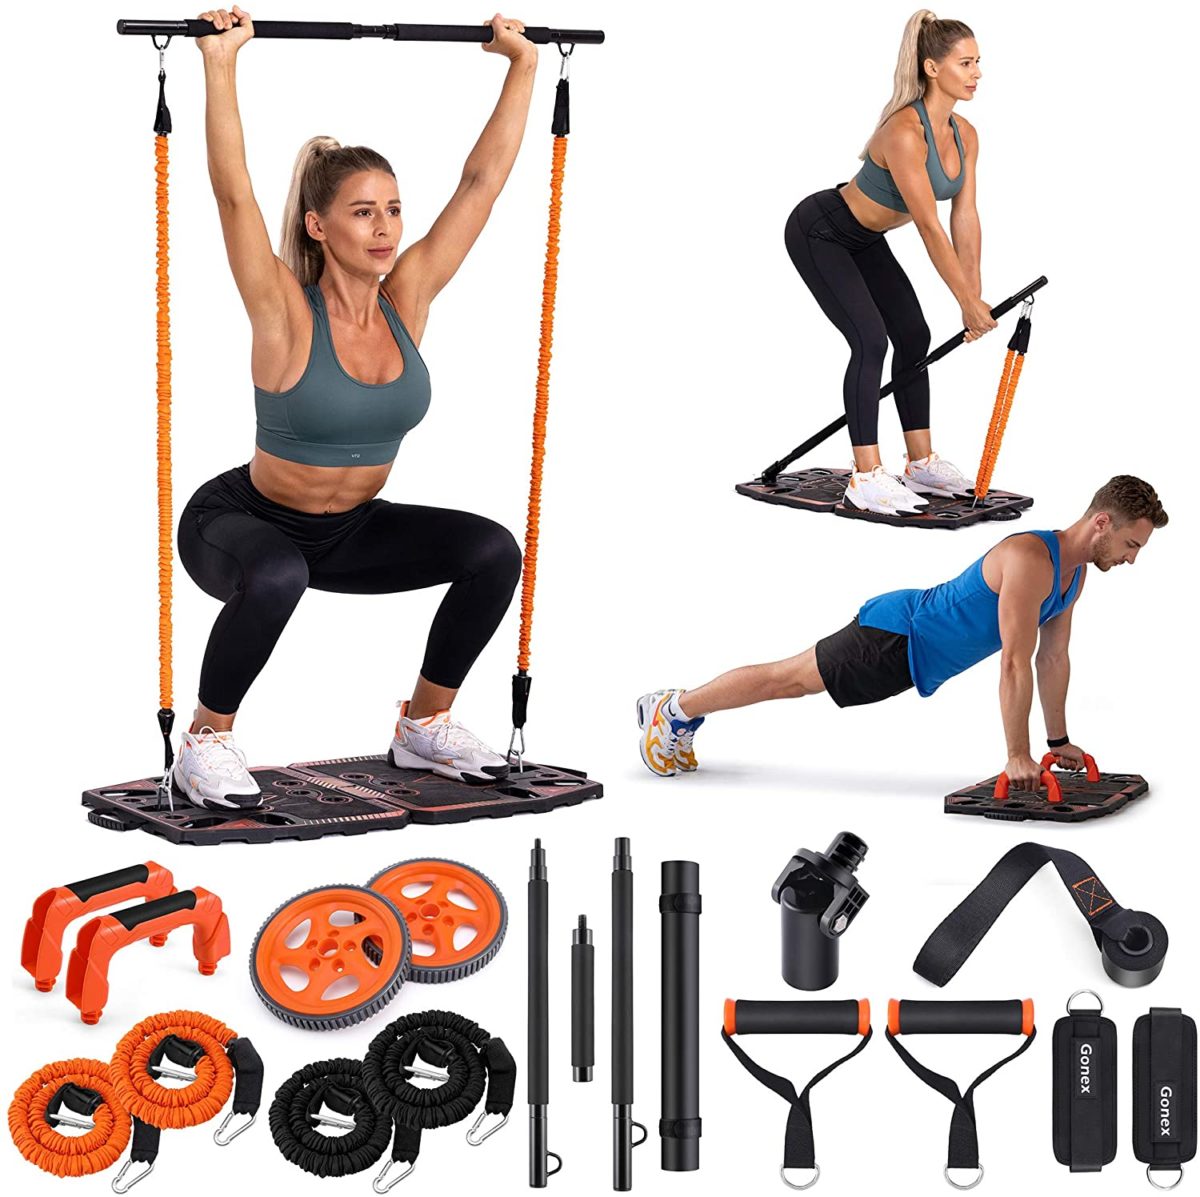 From Pricey to Cheap, Here Are 35 Pieces of Workout Equipment You Can Buy Right Now